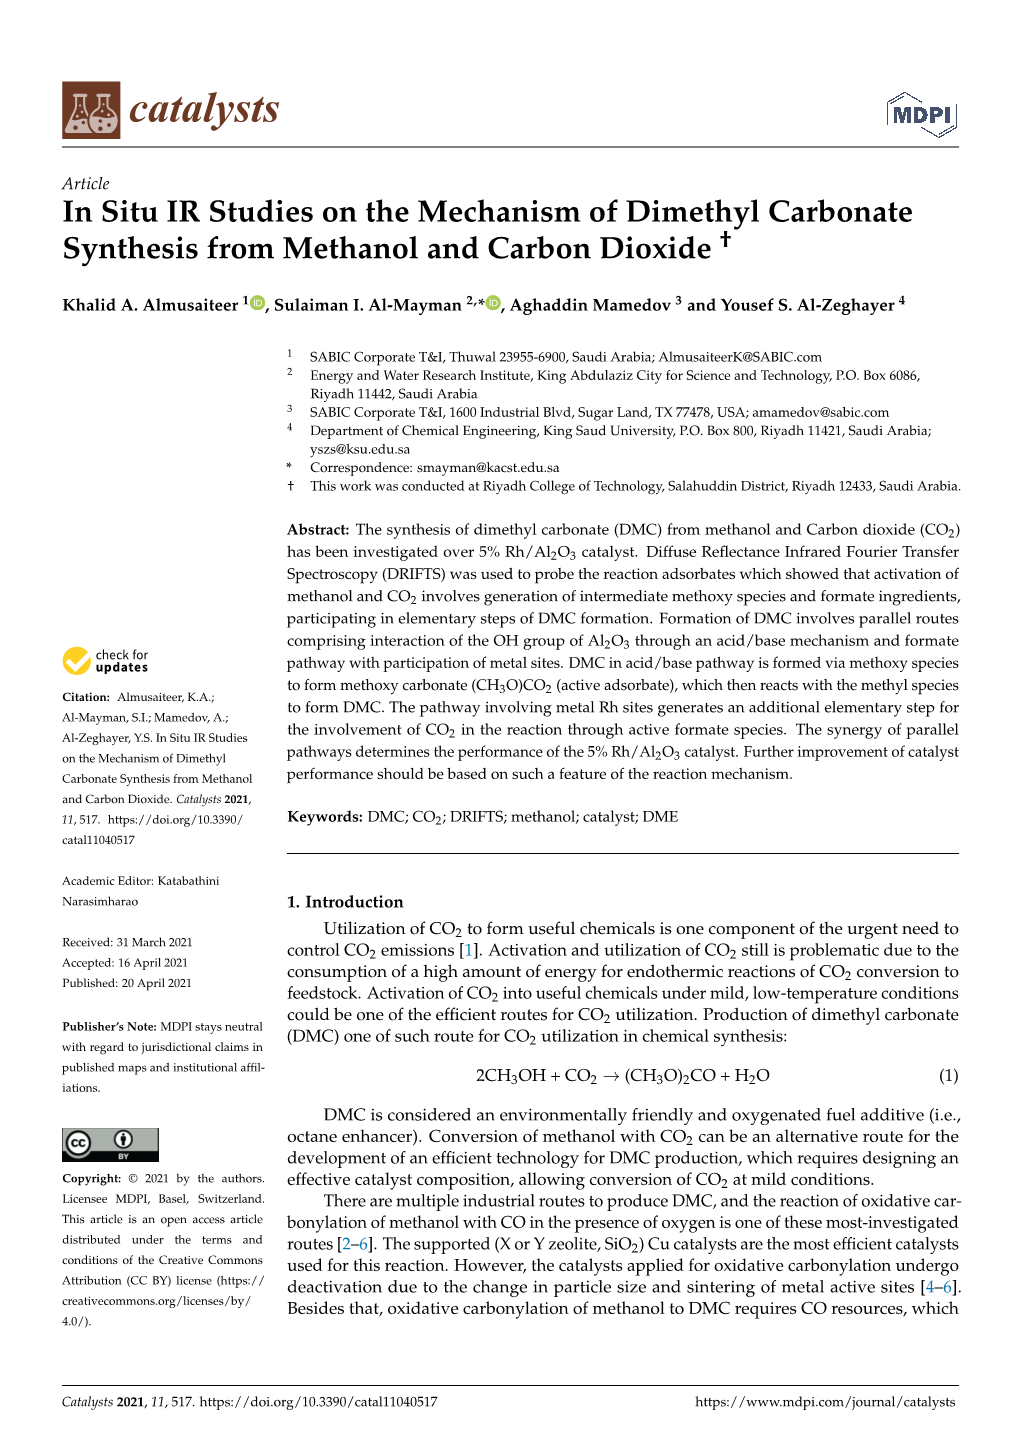 In Situ IR Studies on the Mechanism of Dimethyl Carbonate Synthesis from Methanol and Carbon Dioxide †